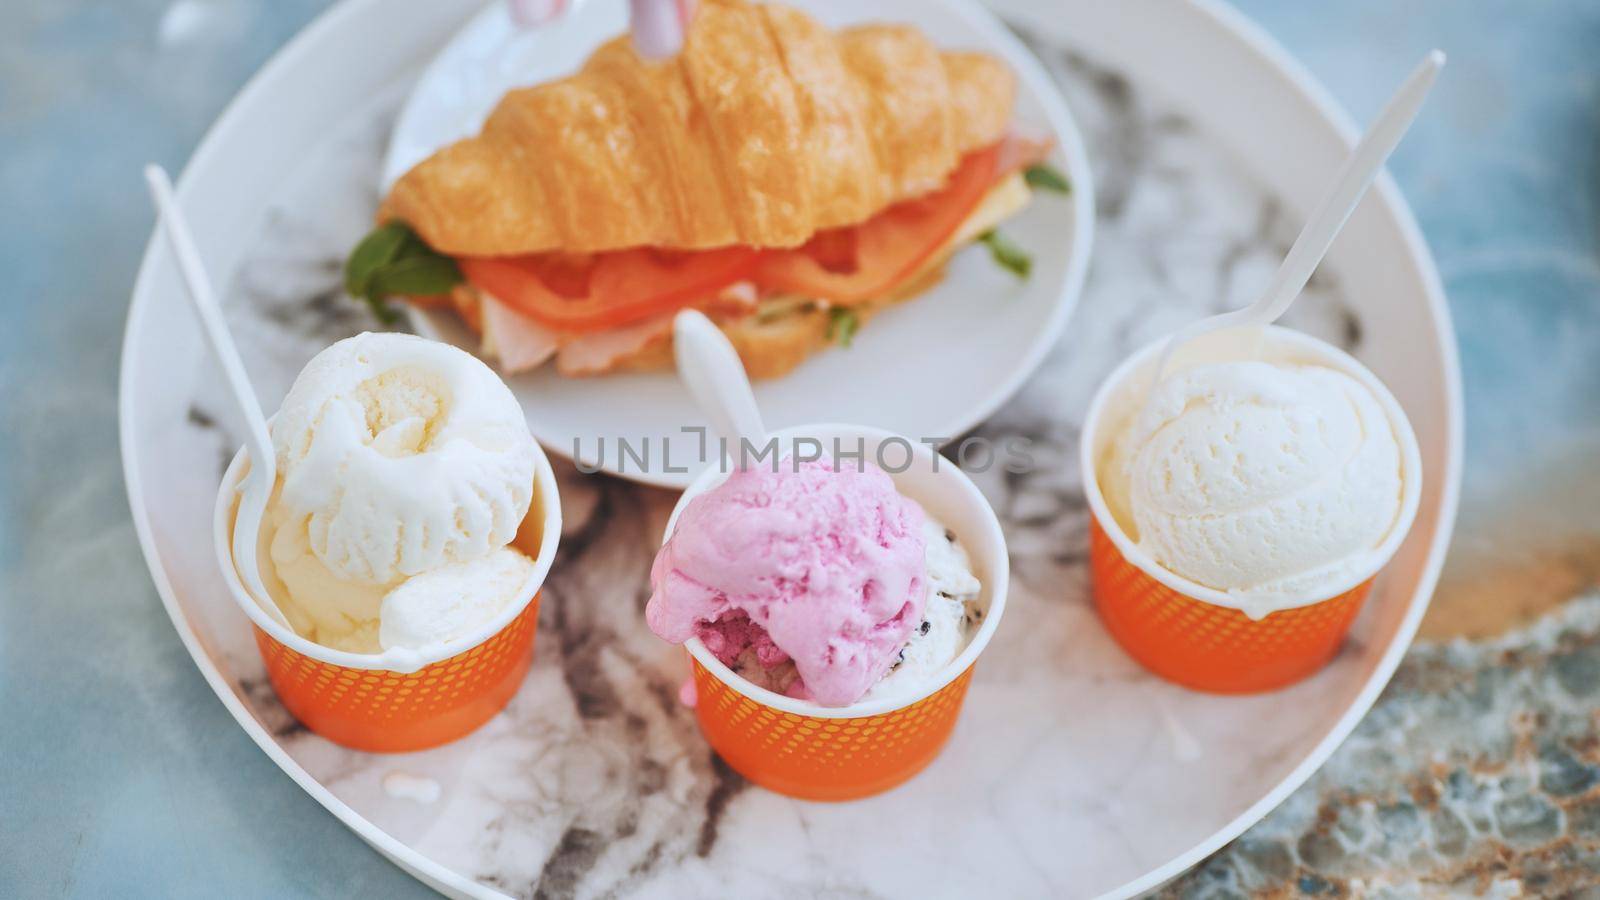 Ice cream and croissant with meat on the plate at the cafe